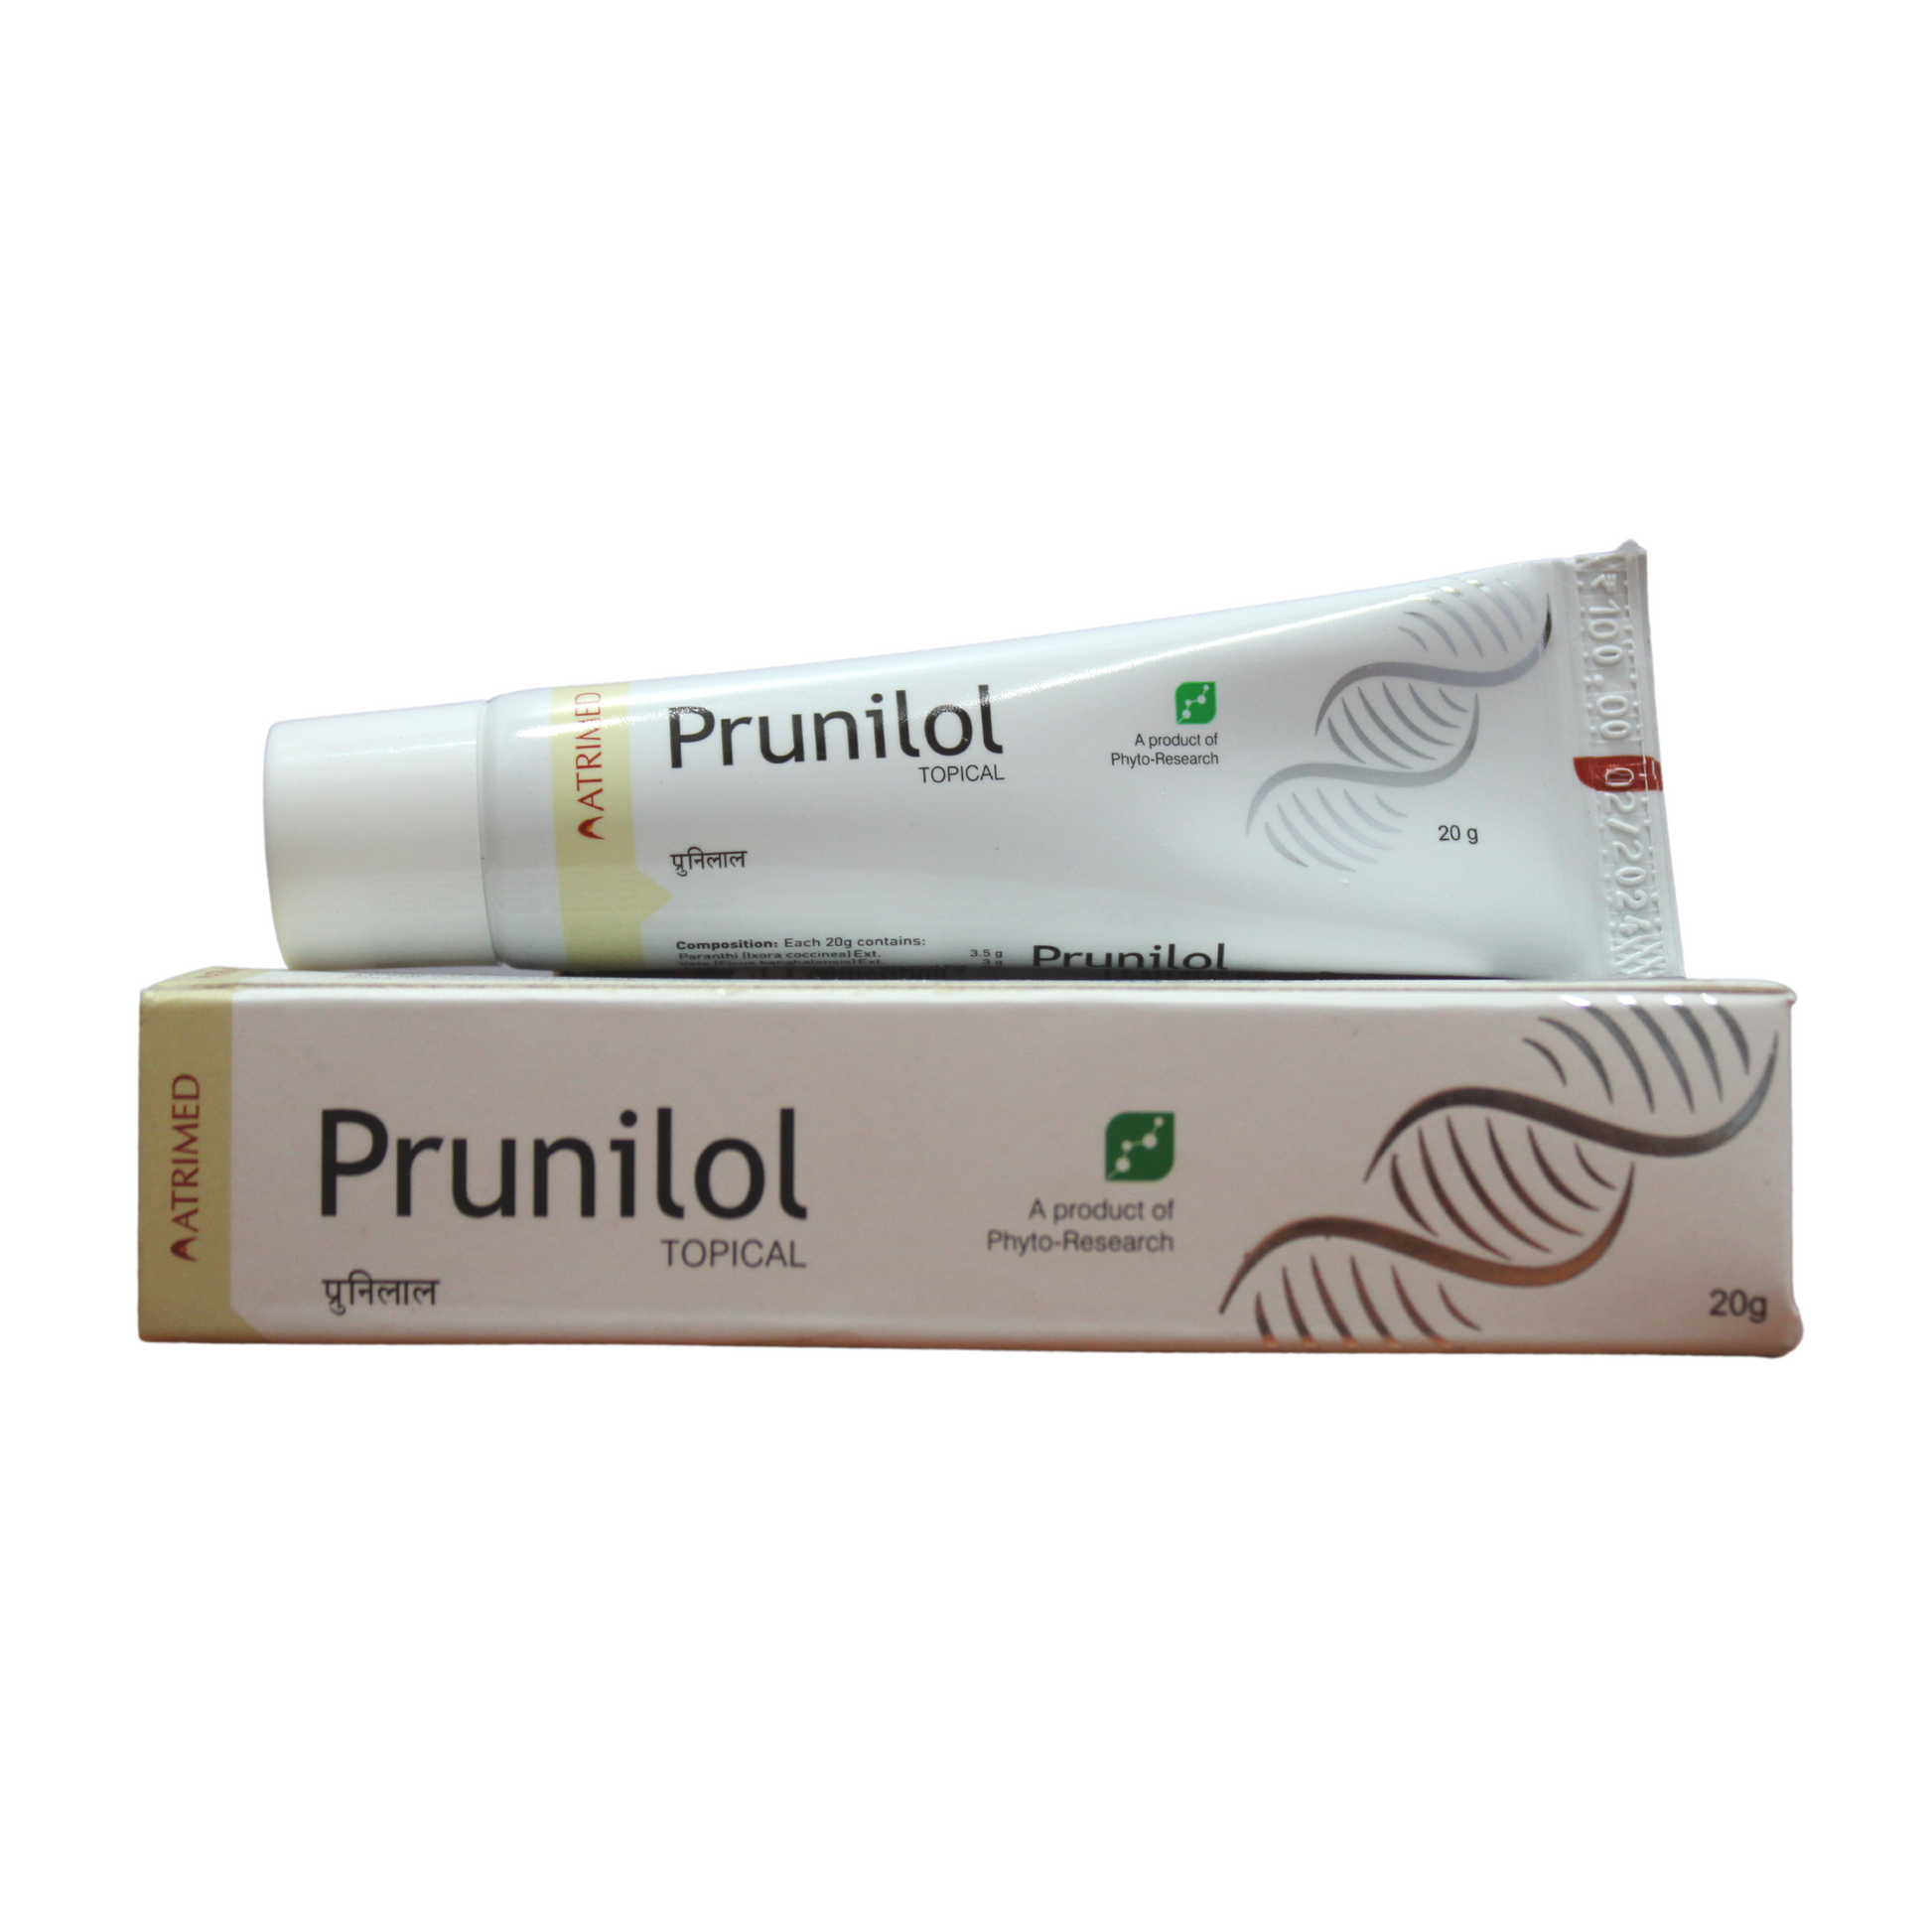 Shop Prunilol topical 20gm at price 100.00 from Atrimed Online - Ayush Care